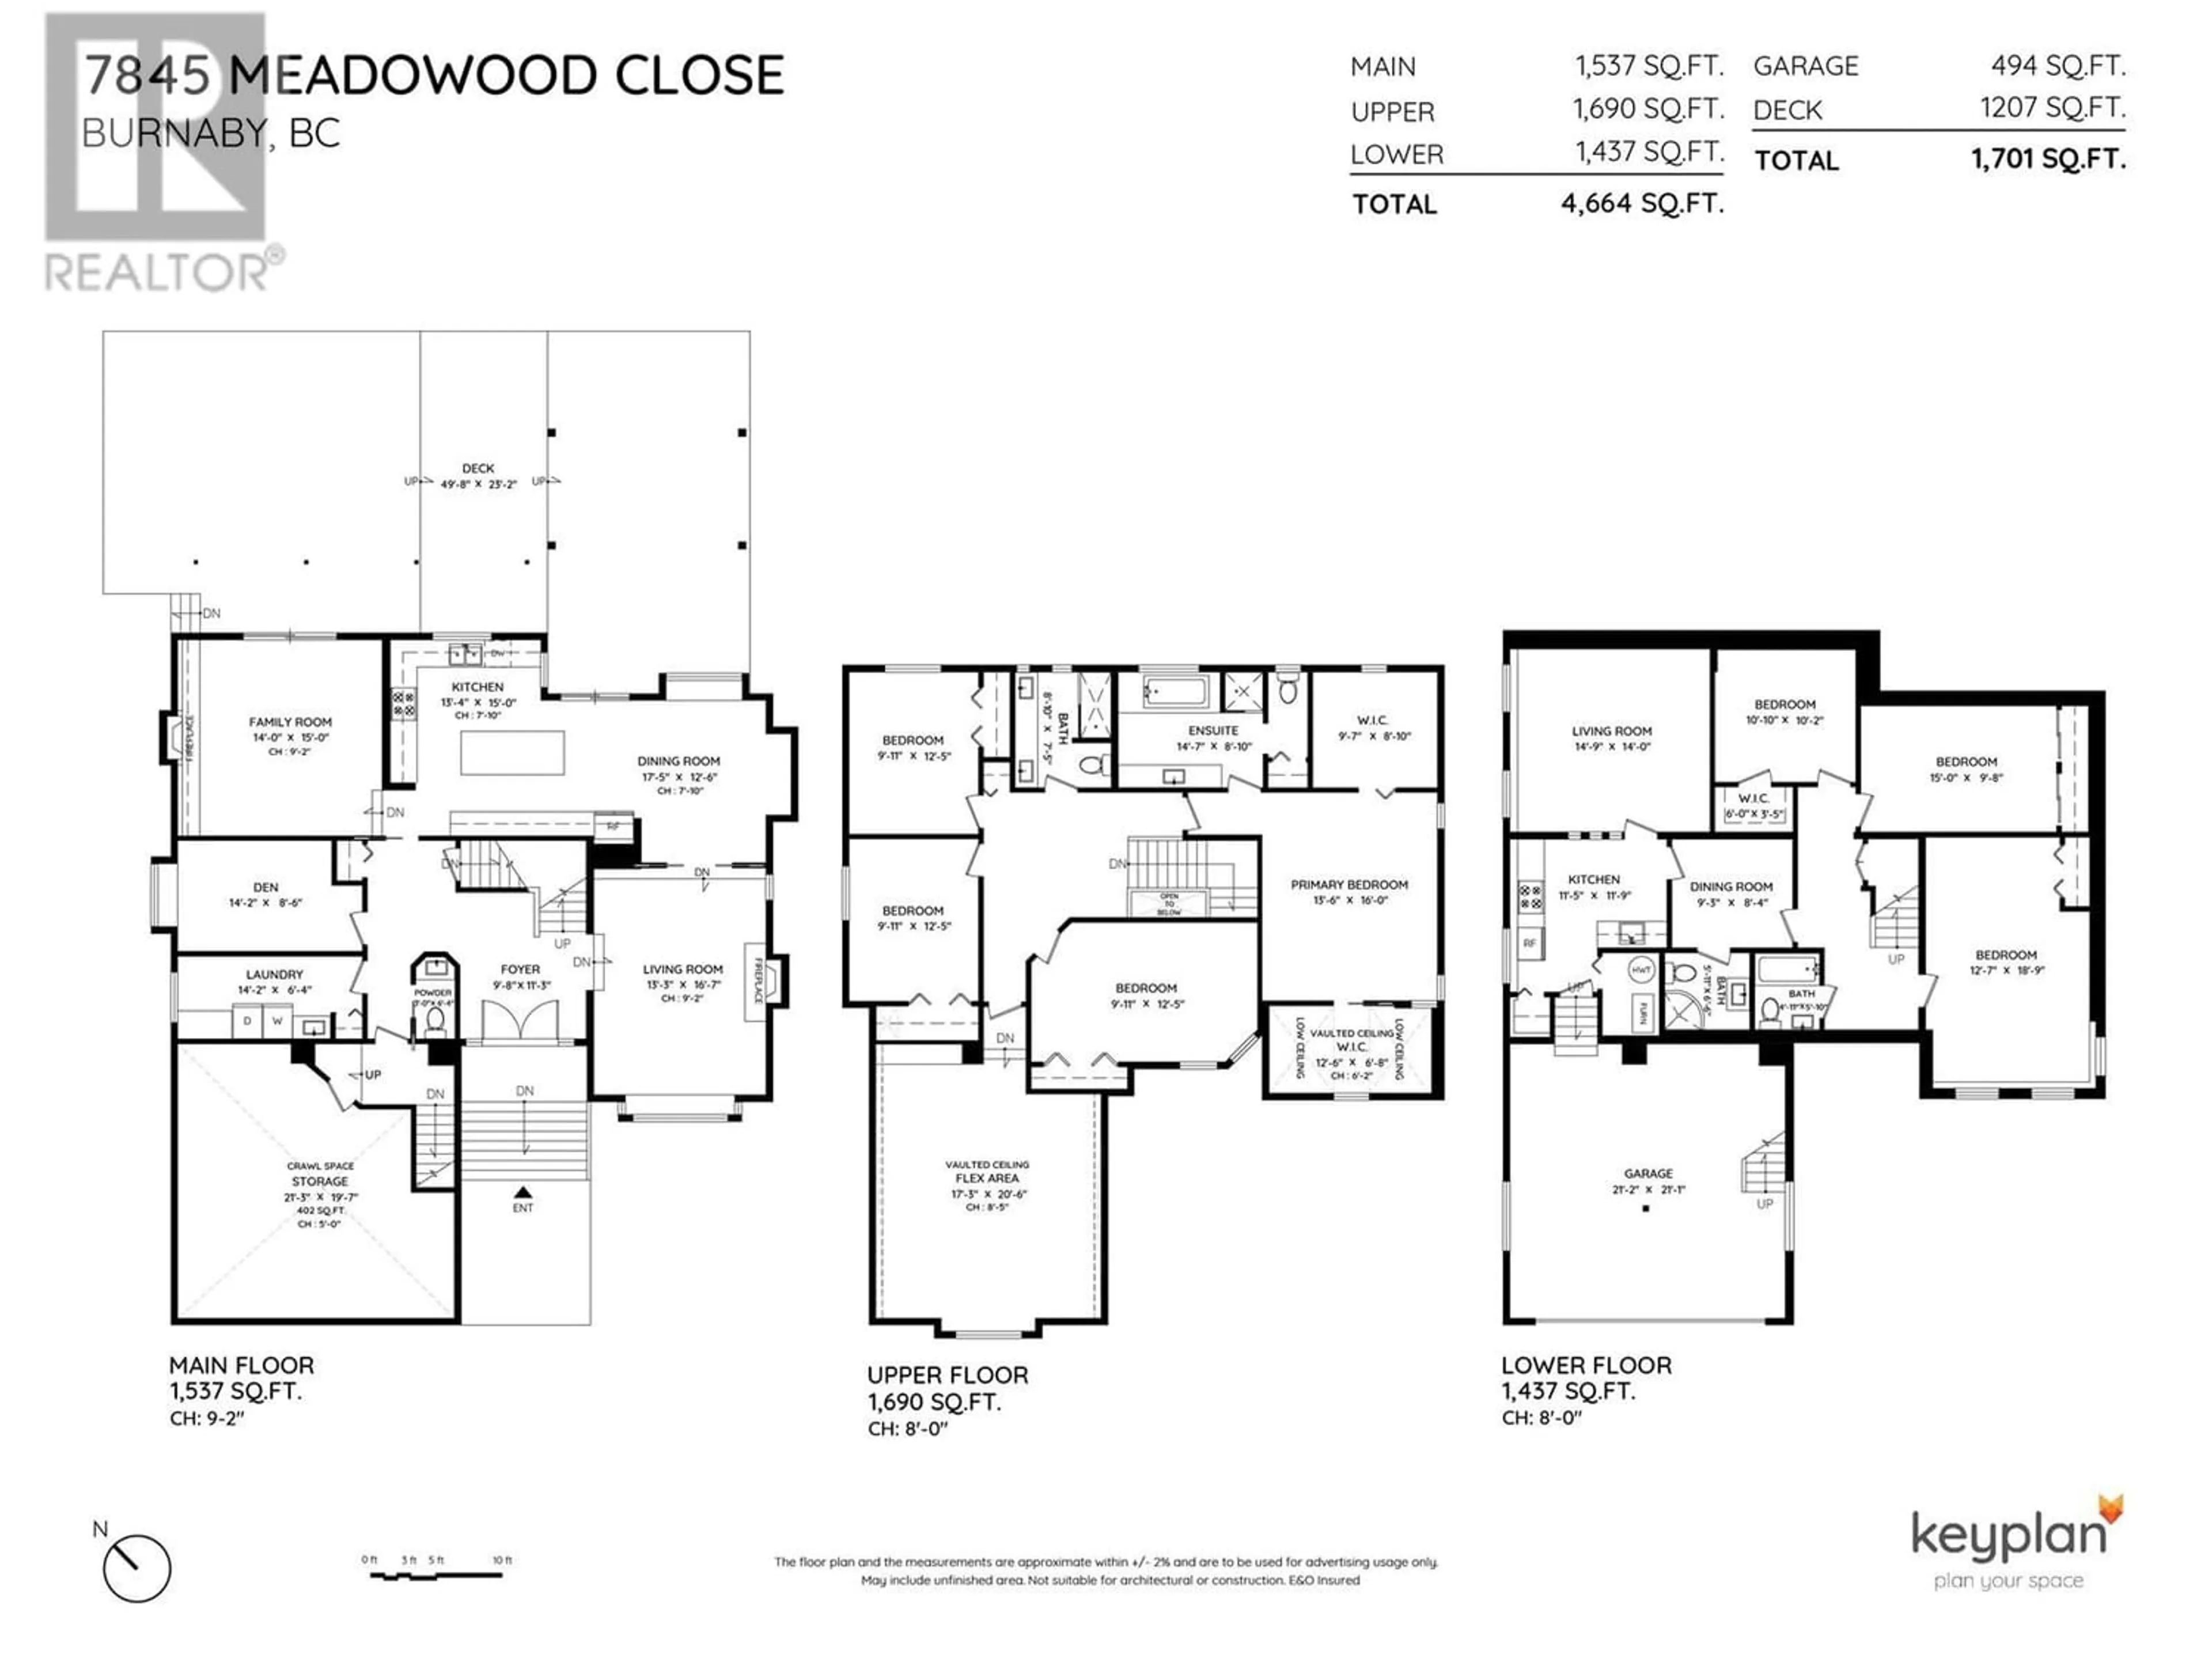 Floor plan for 7845 MEADOWOOD CLOSE, Burnaby British Columbia V5A4C2